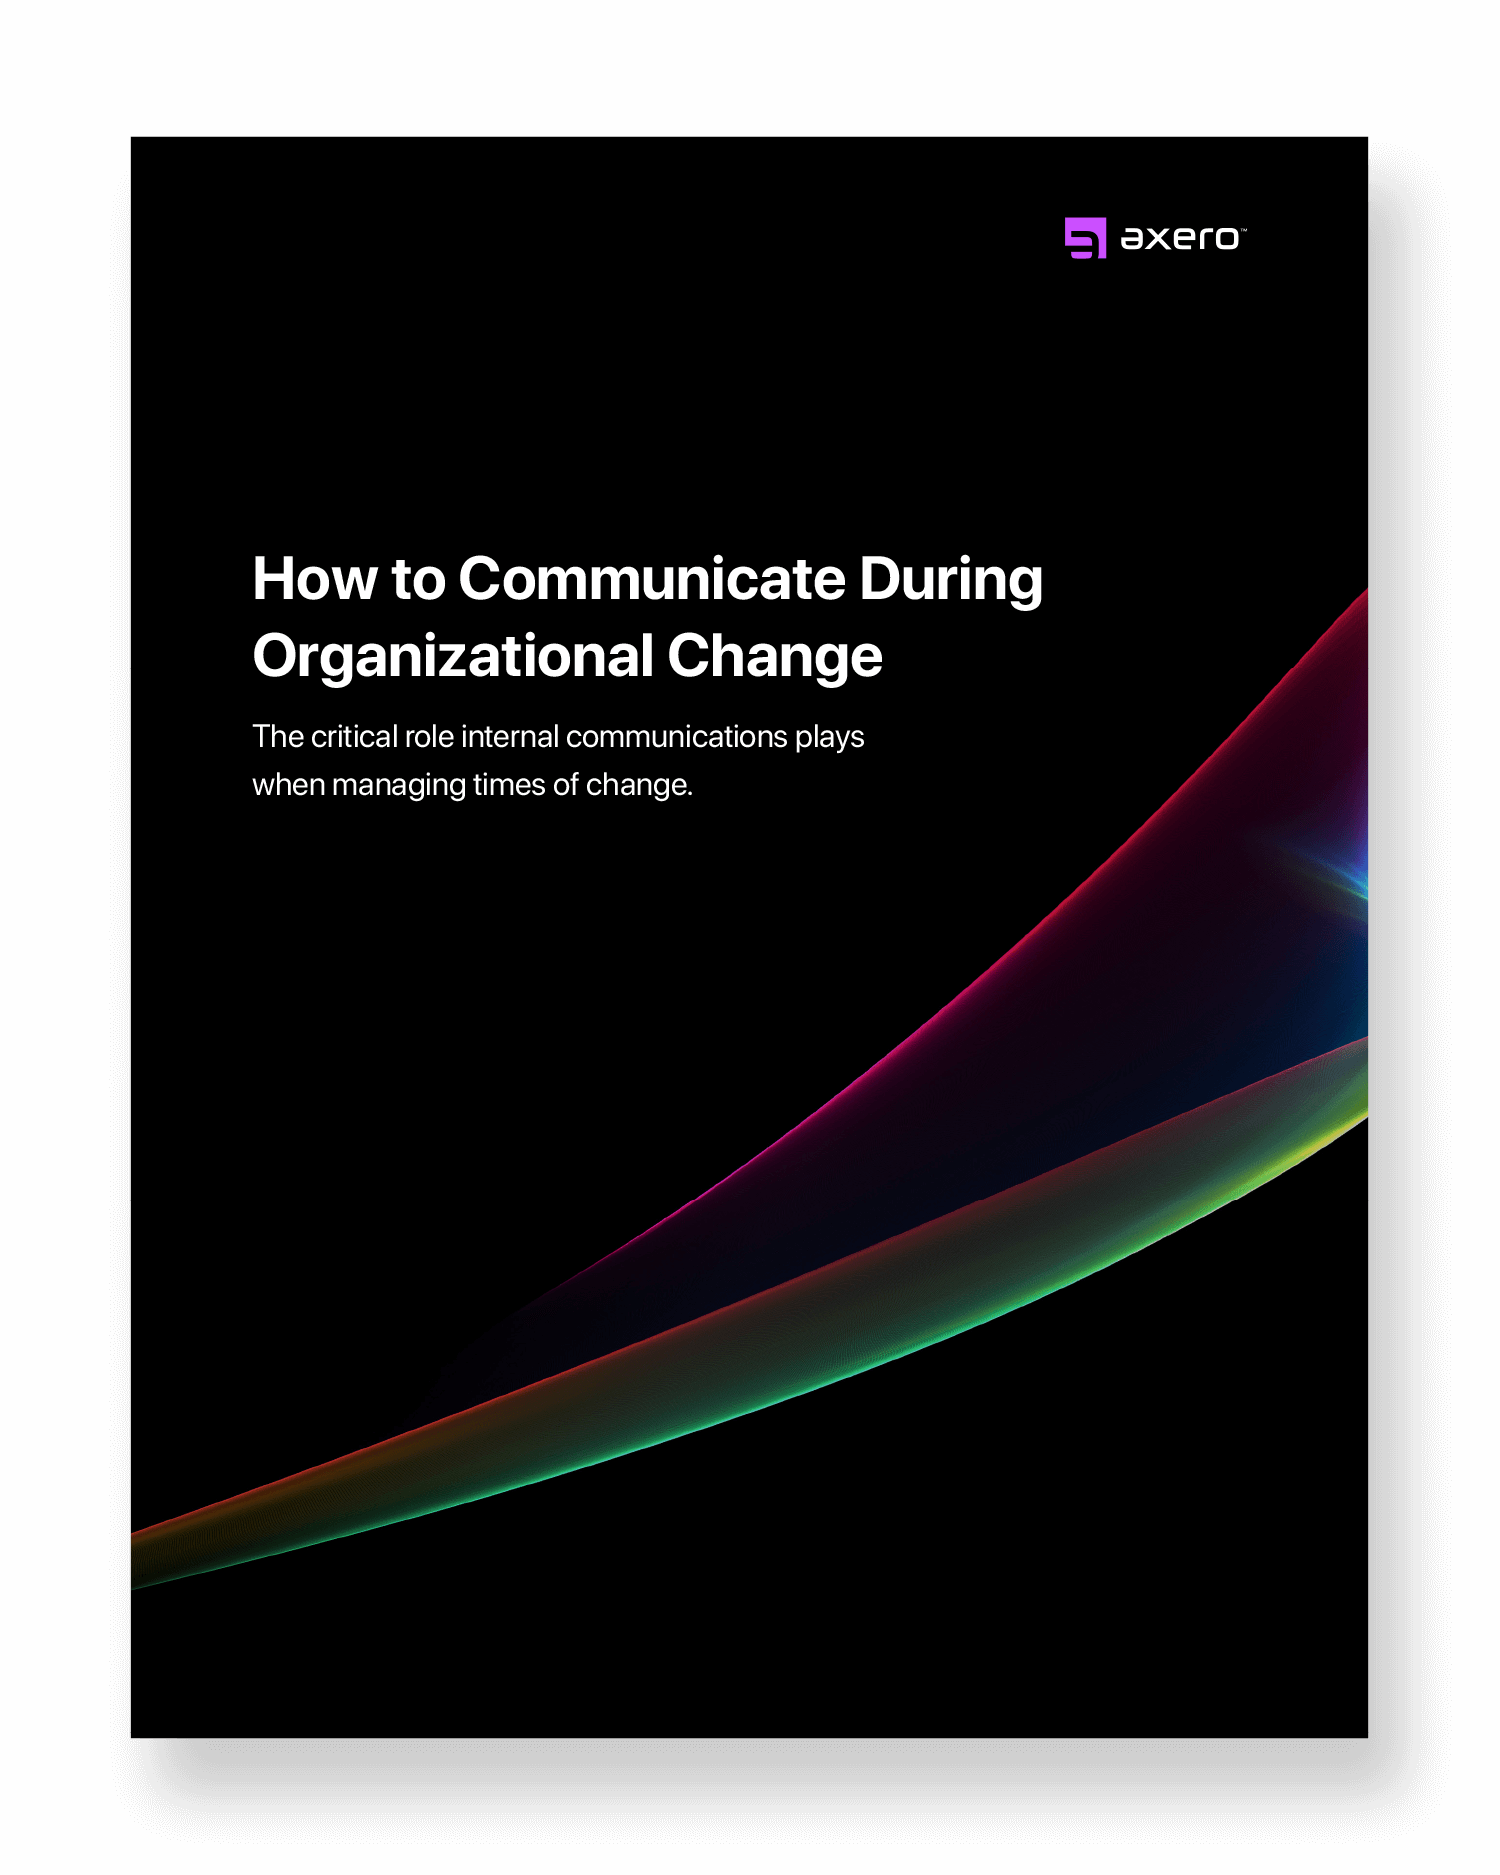 How to Communicate During Organizational Change